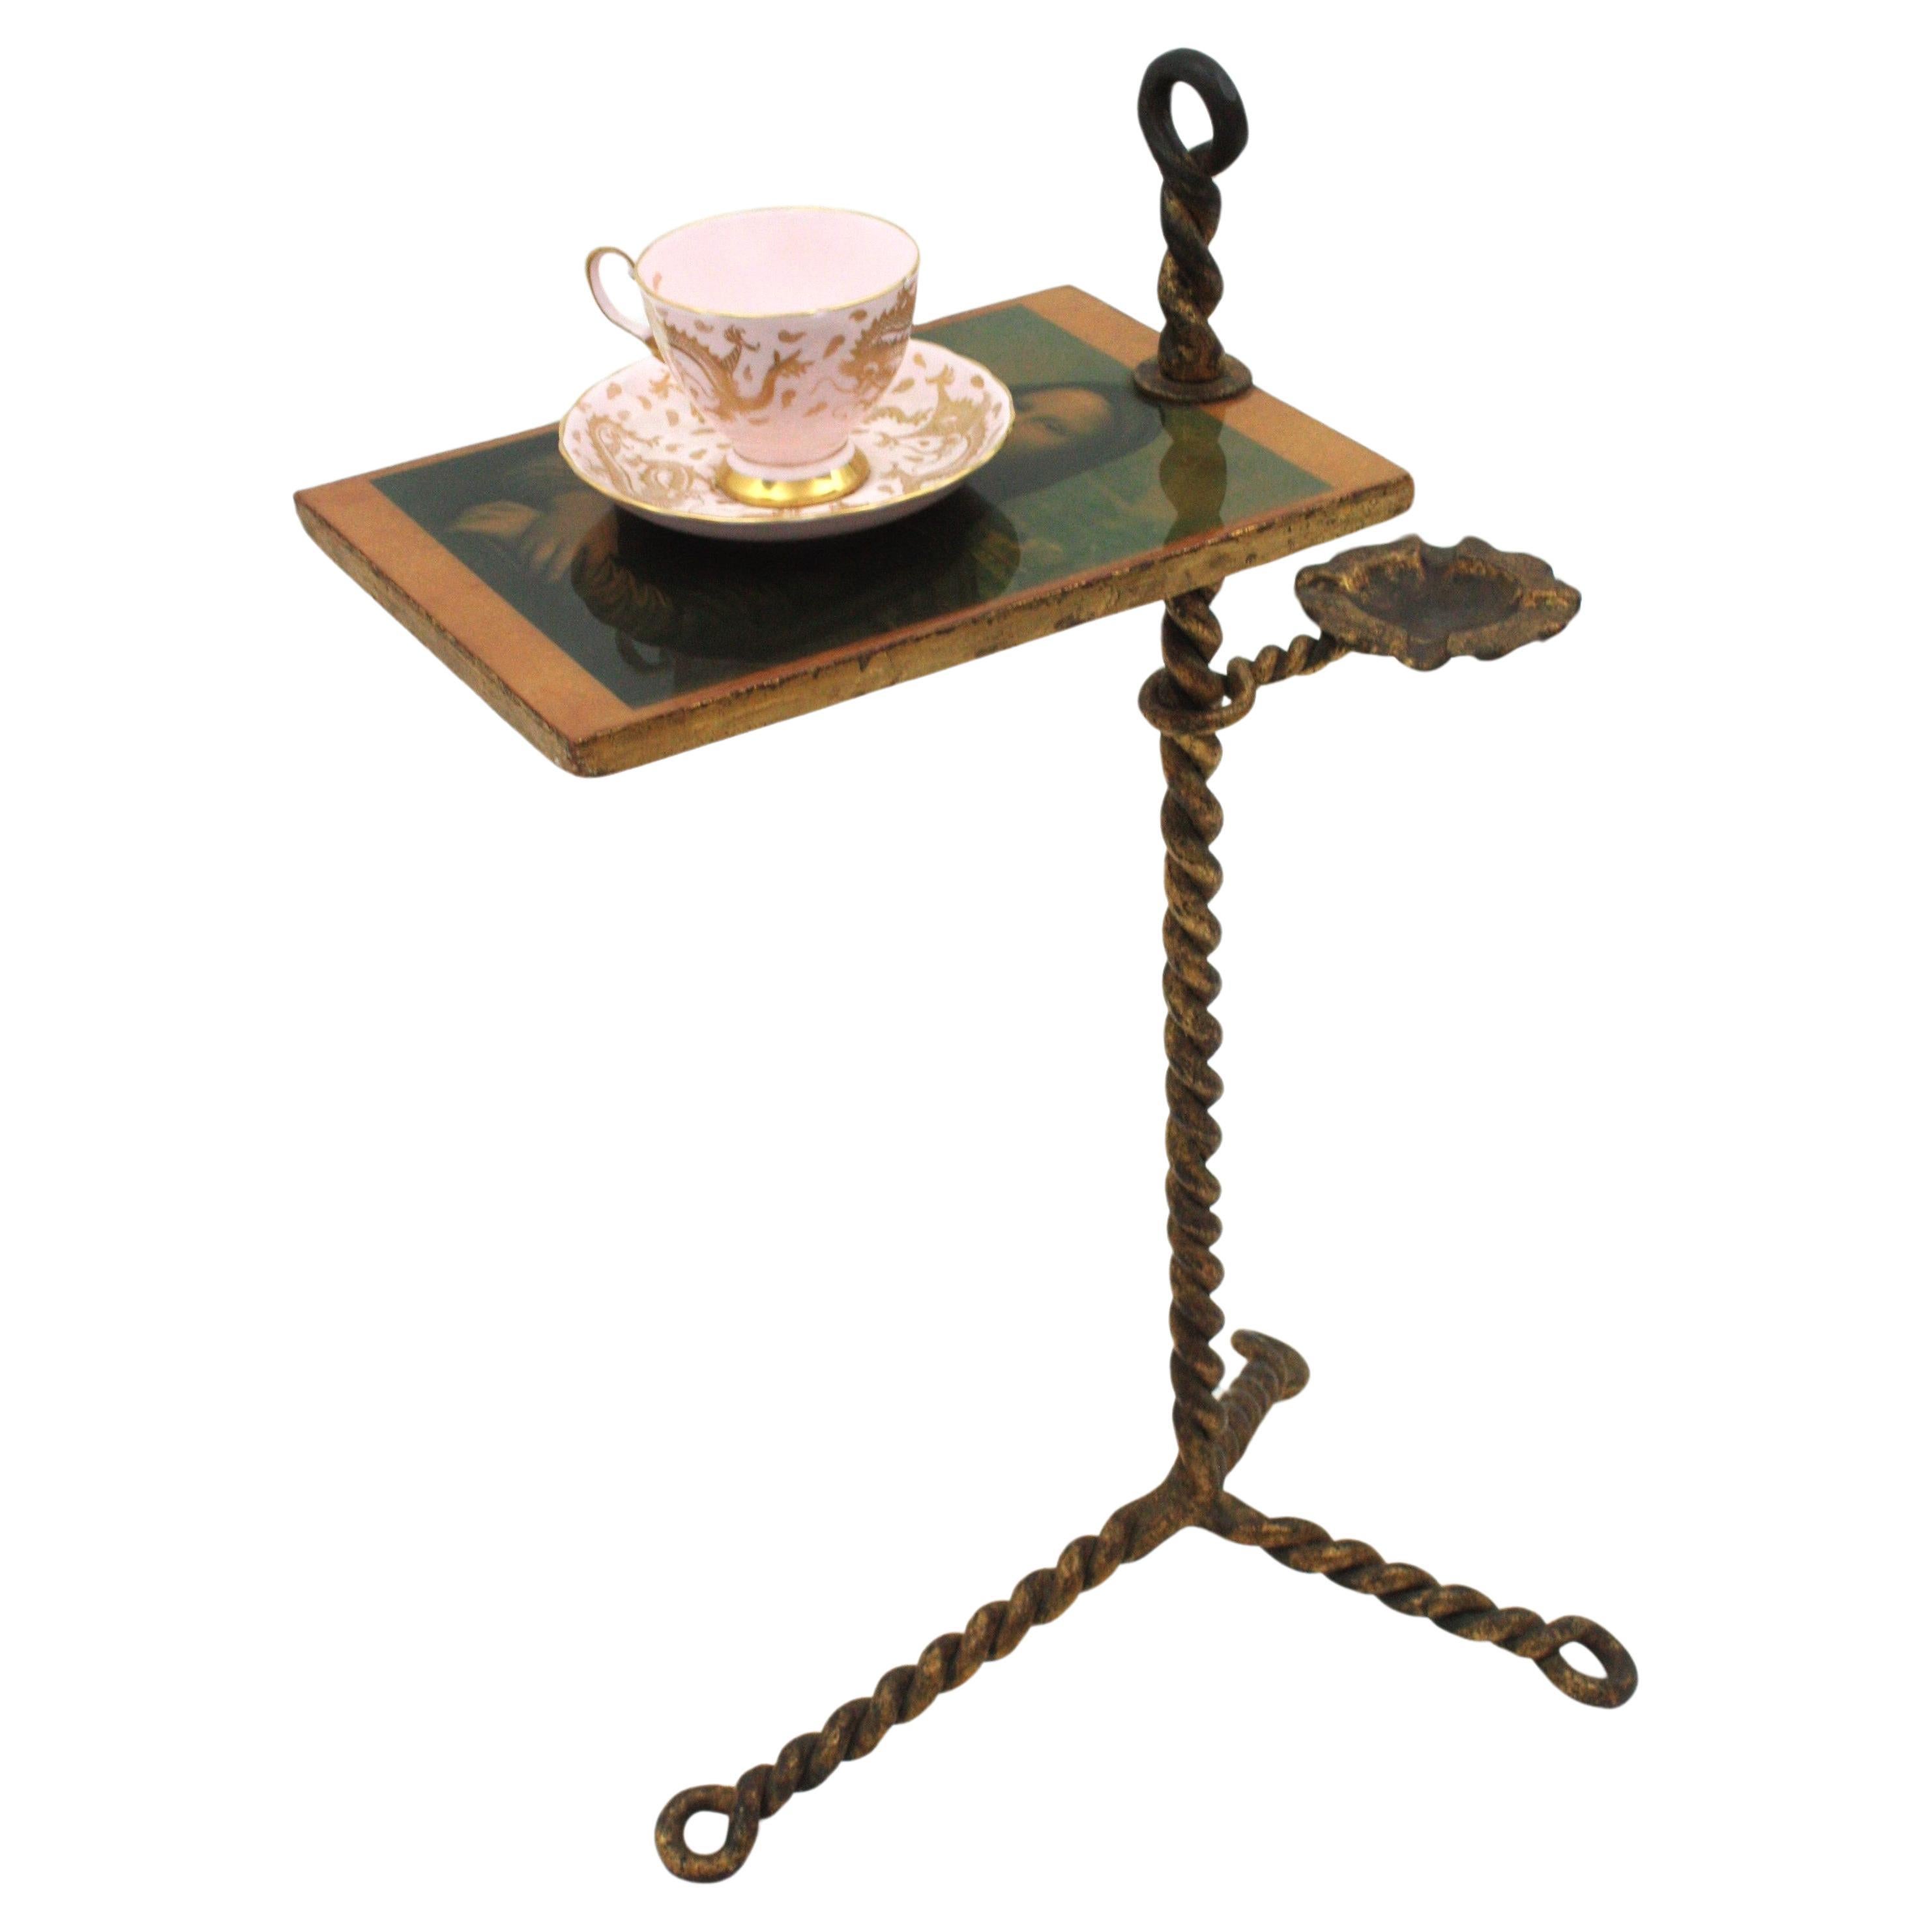 One of a kind wrought gilt iron table with ashtray with Monna Lisa print on top. Spain, 1940s-1950s.
This stylish hand forged iron table features a rectangular tabletop standing on a tripod base. The Monna Lisa is pictured on the top, it has an iron